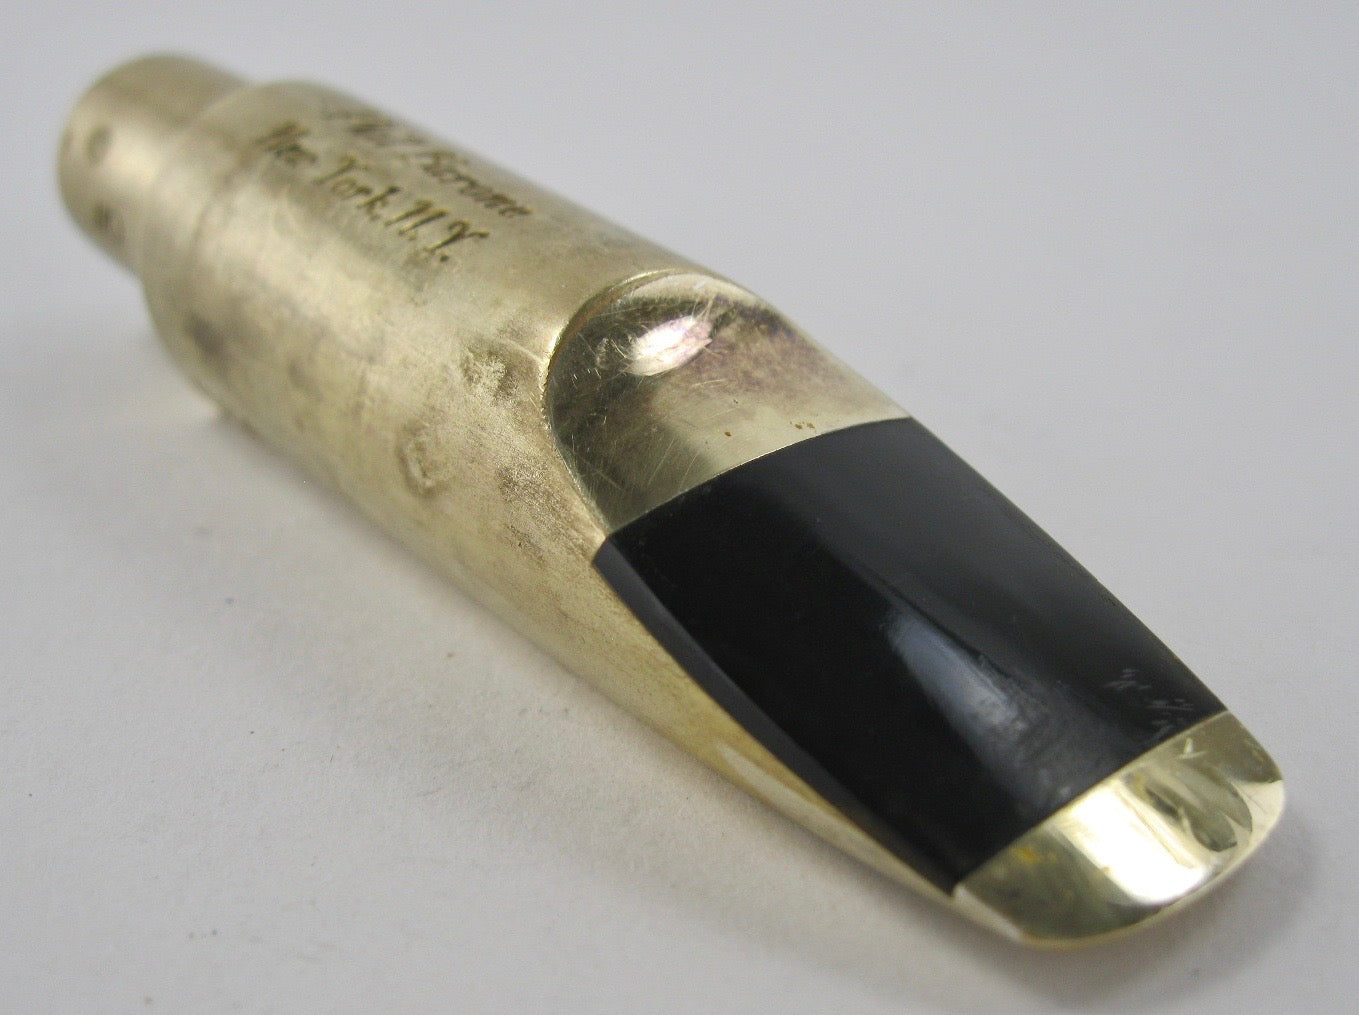 Barone Precision Crafted (.110) Tenor Saxophone Mouthpiece | Junkdude.com  - Used and New Saxophones and Saxophone Mouthpieces